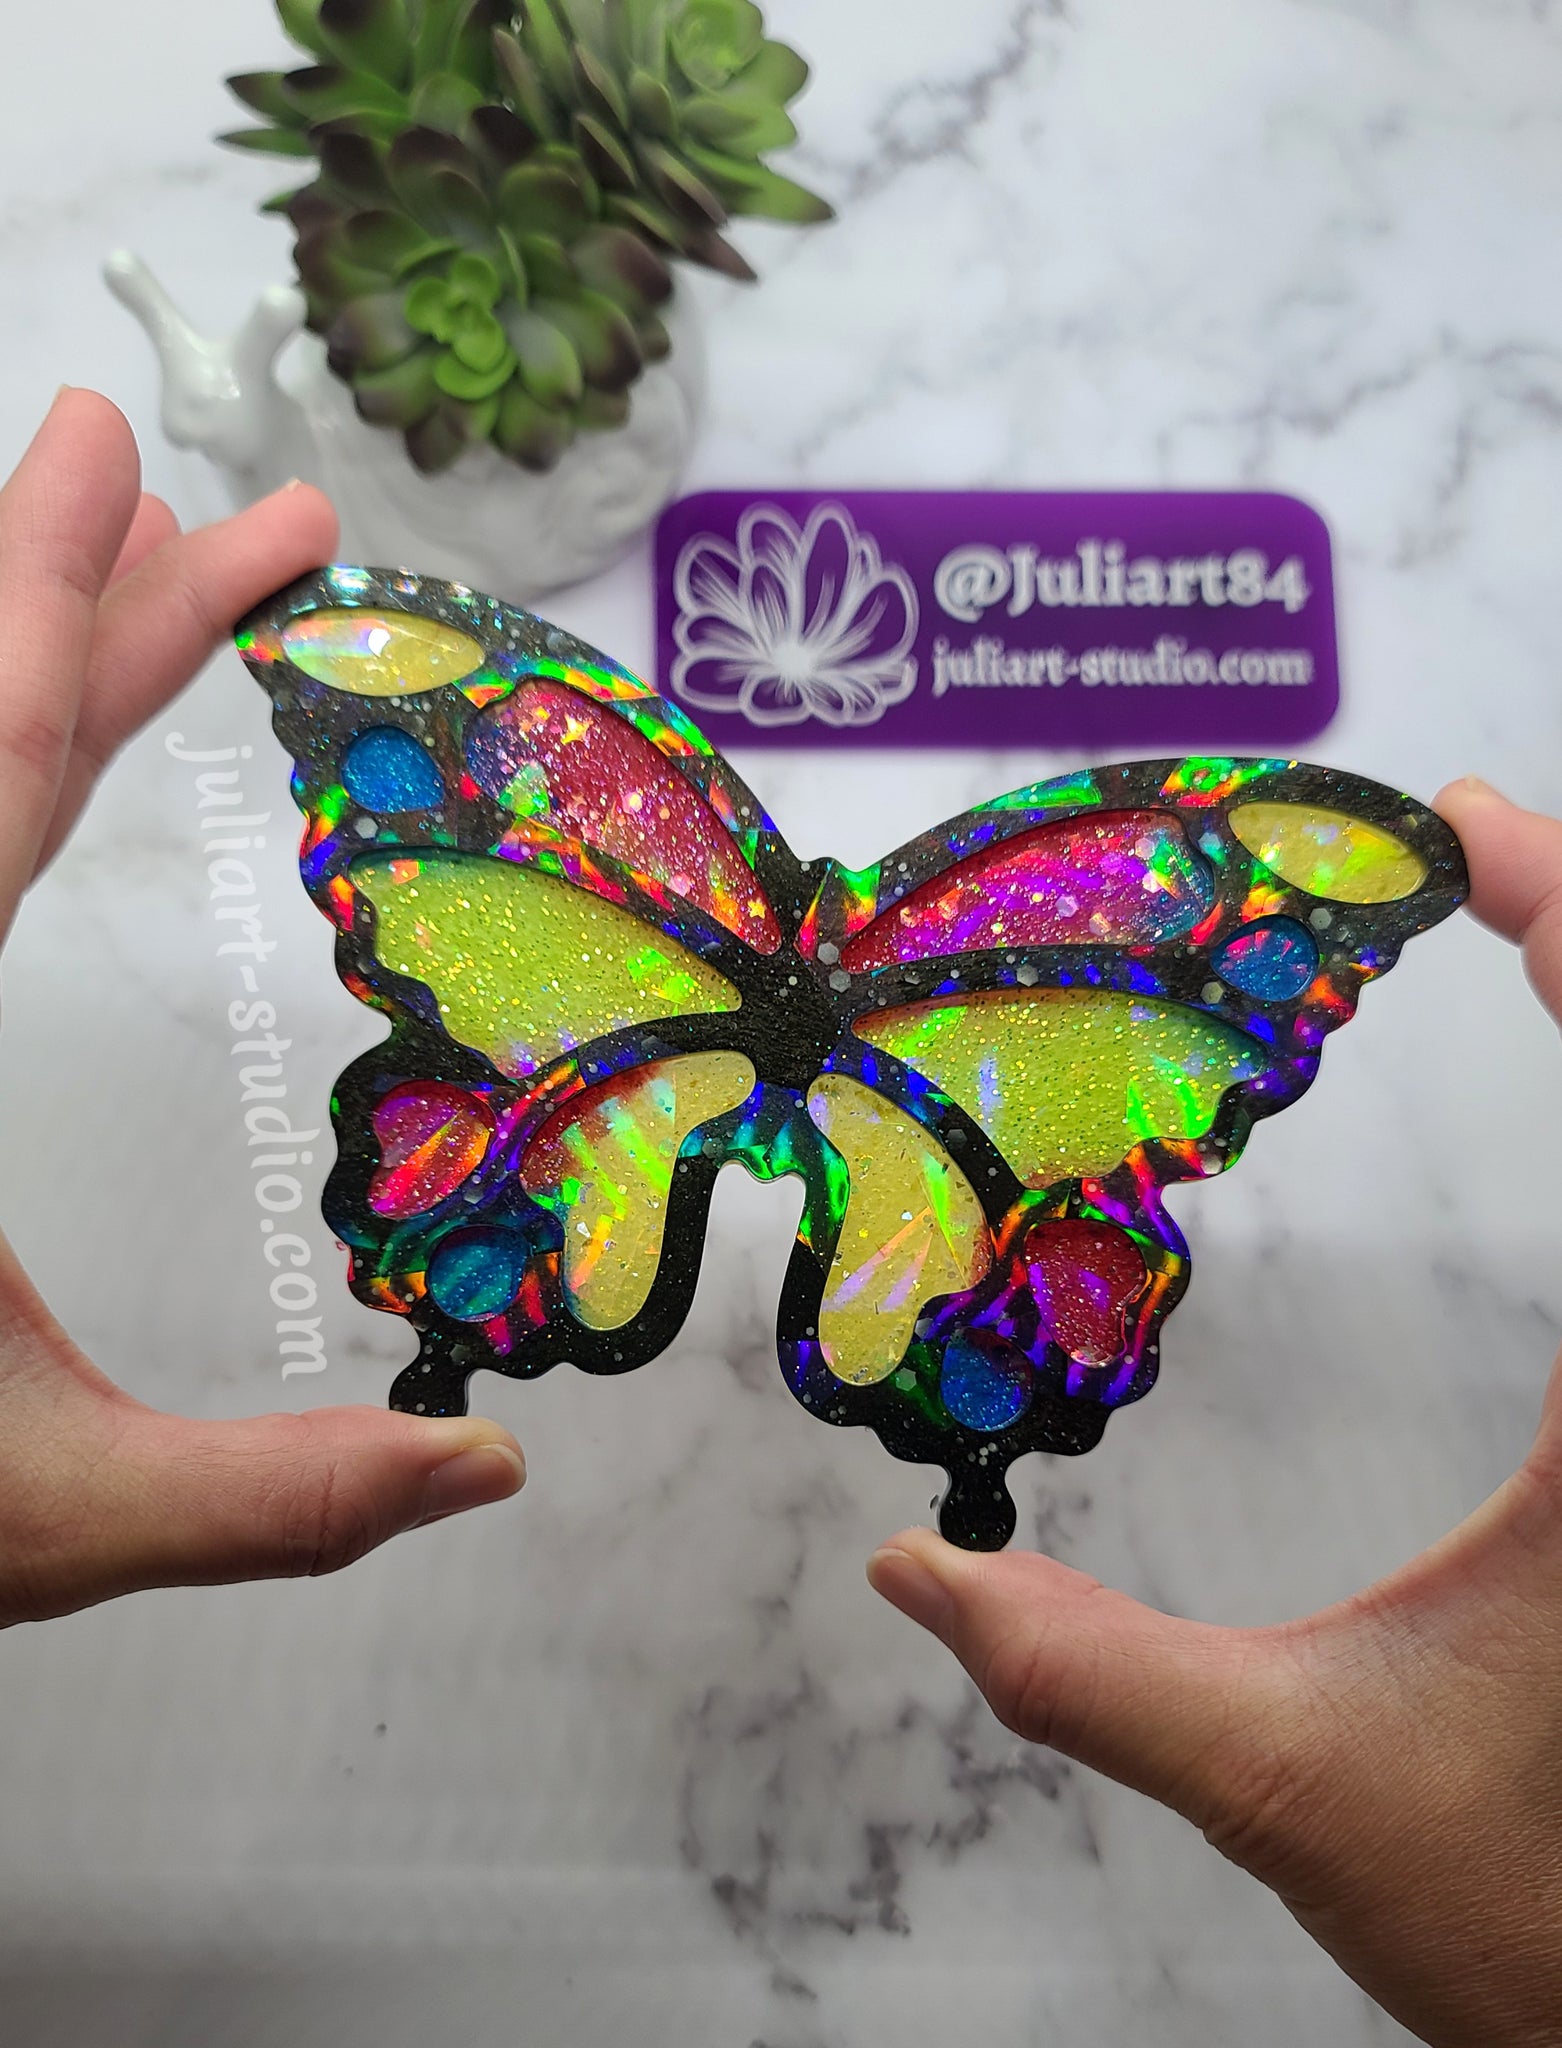 4.5 inch HOLO Angel Silicone Mold for Resin – JuliArtStudio